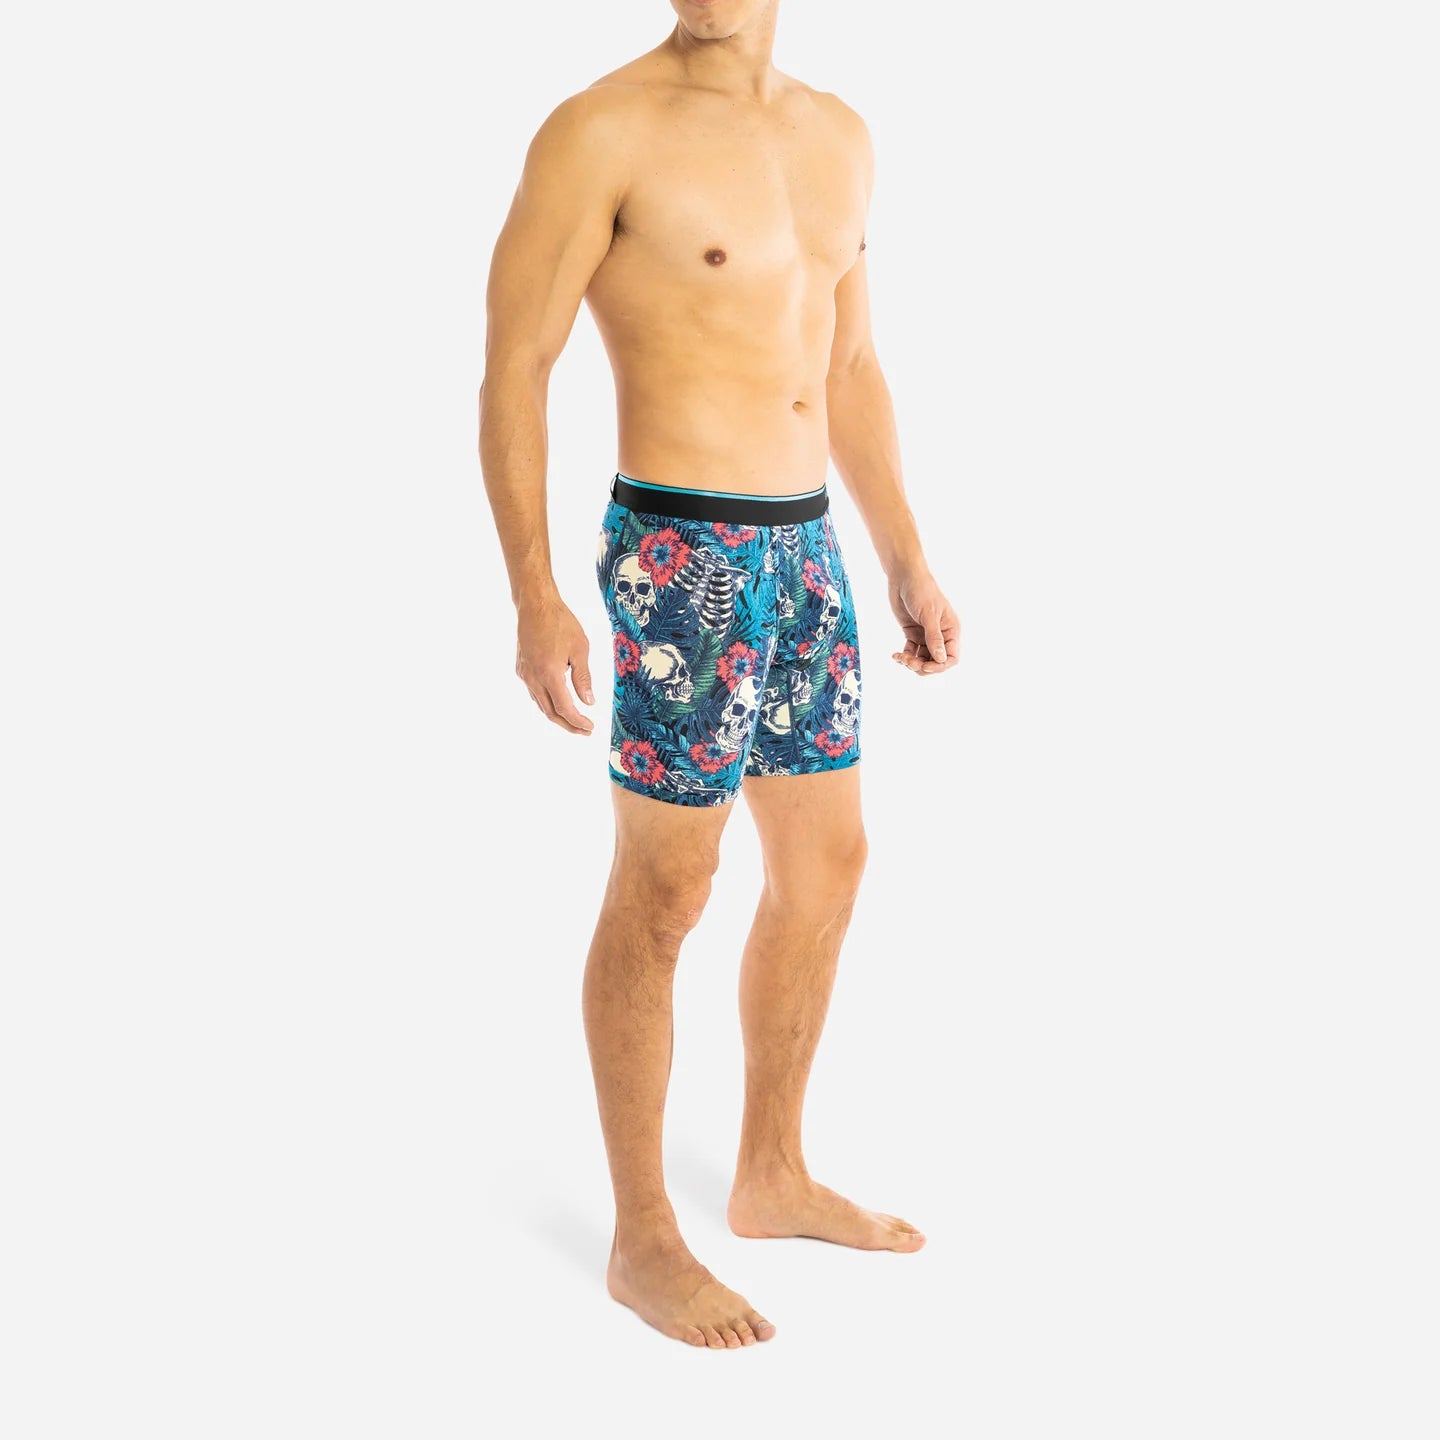 BN3TH Mens Boxer Trunks (2pk) - Breathable Slim Fit with Ball